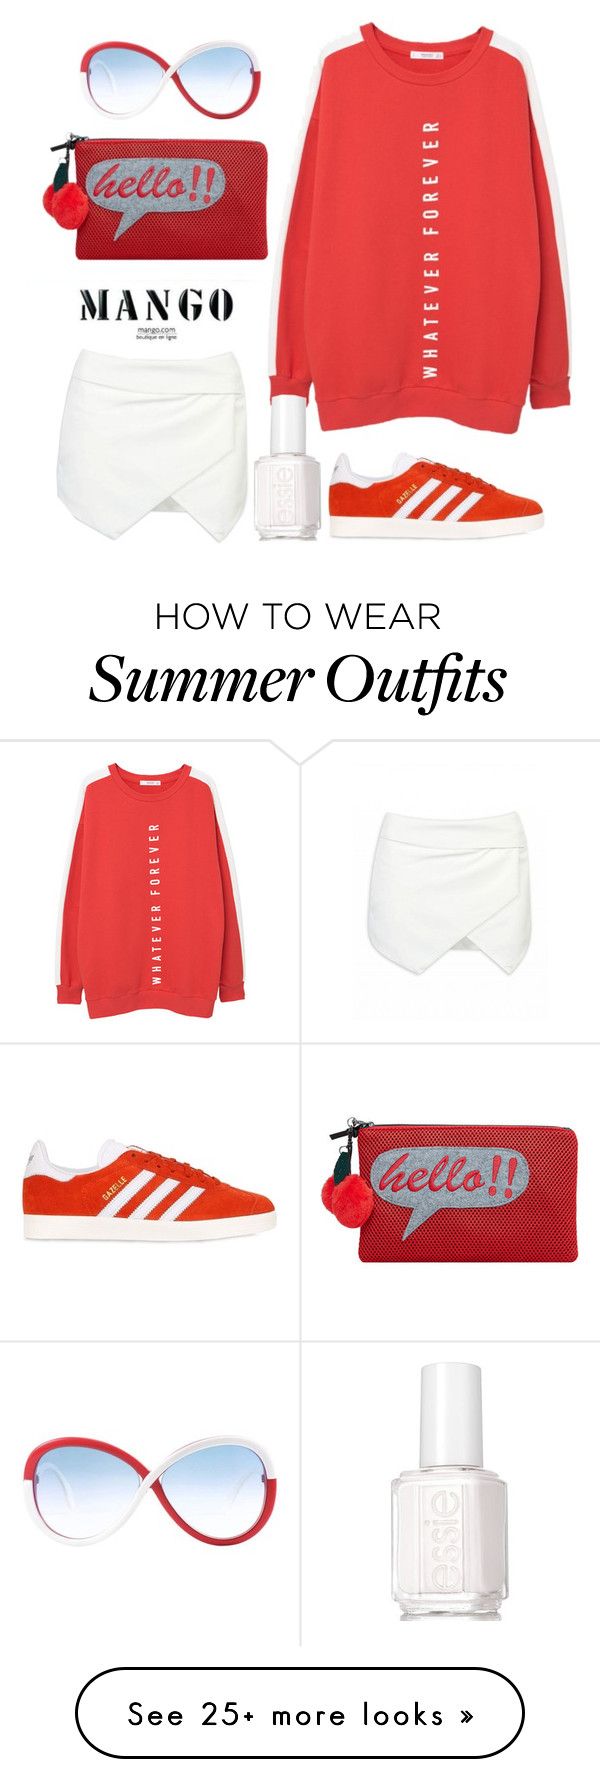 "My today personal Mango outfit" by tiraboschi-b on Polyvore featuring...